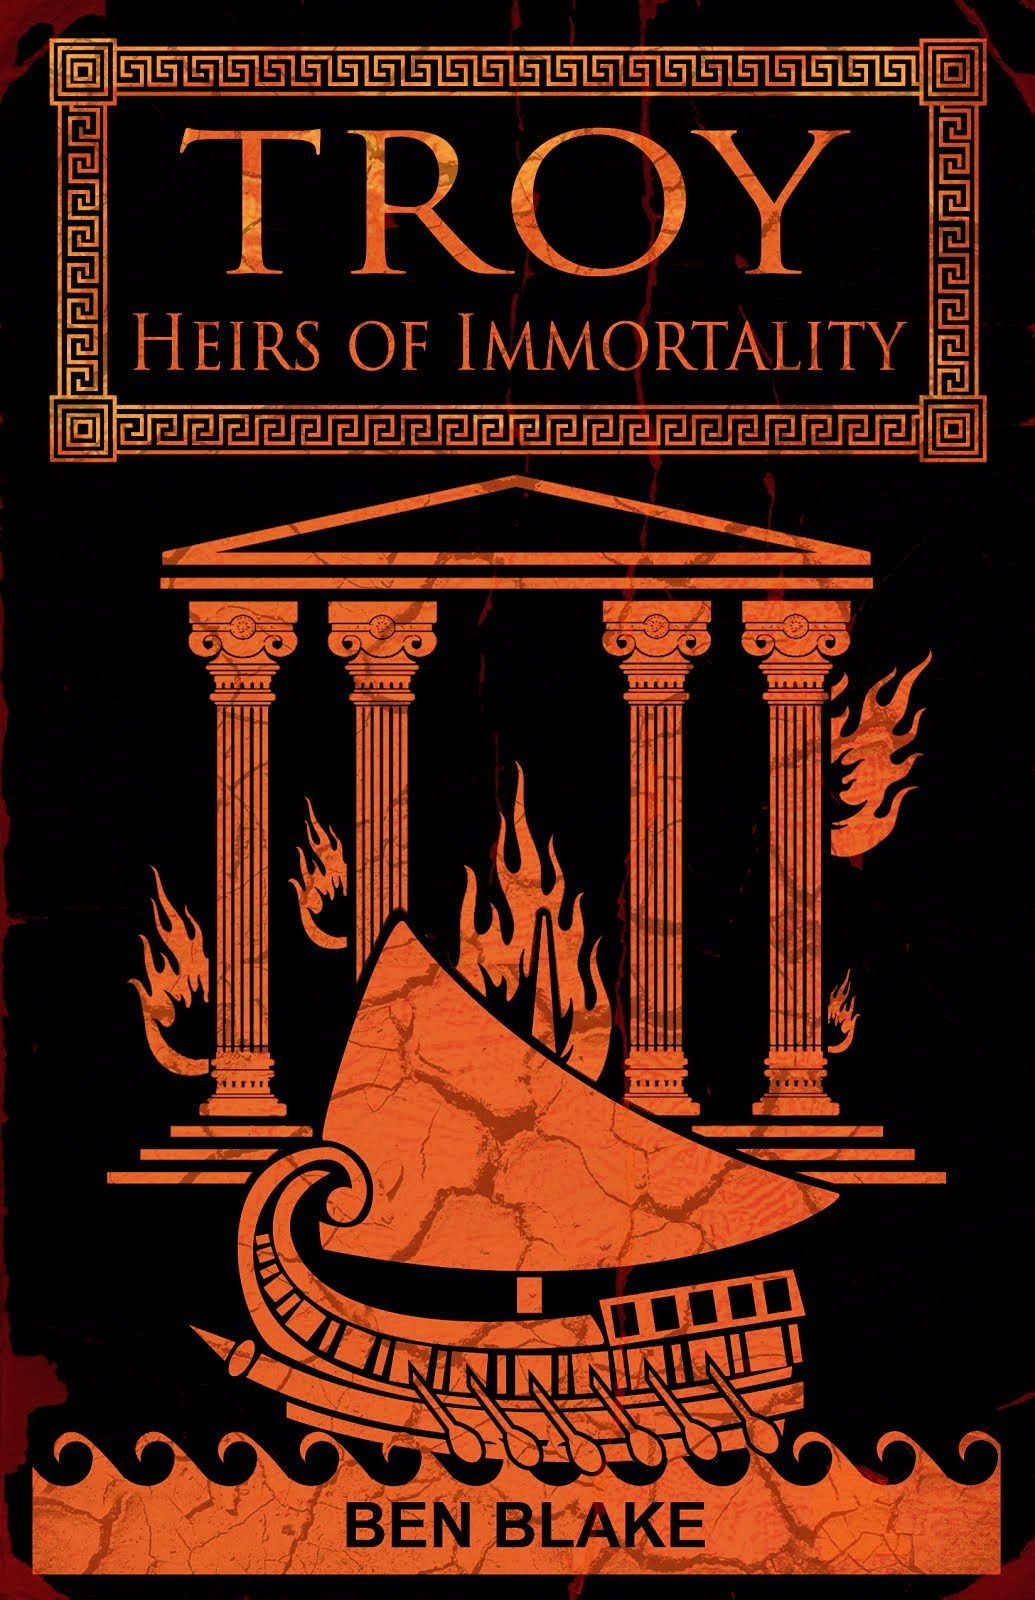 Heirs of Immortality